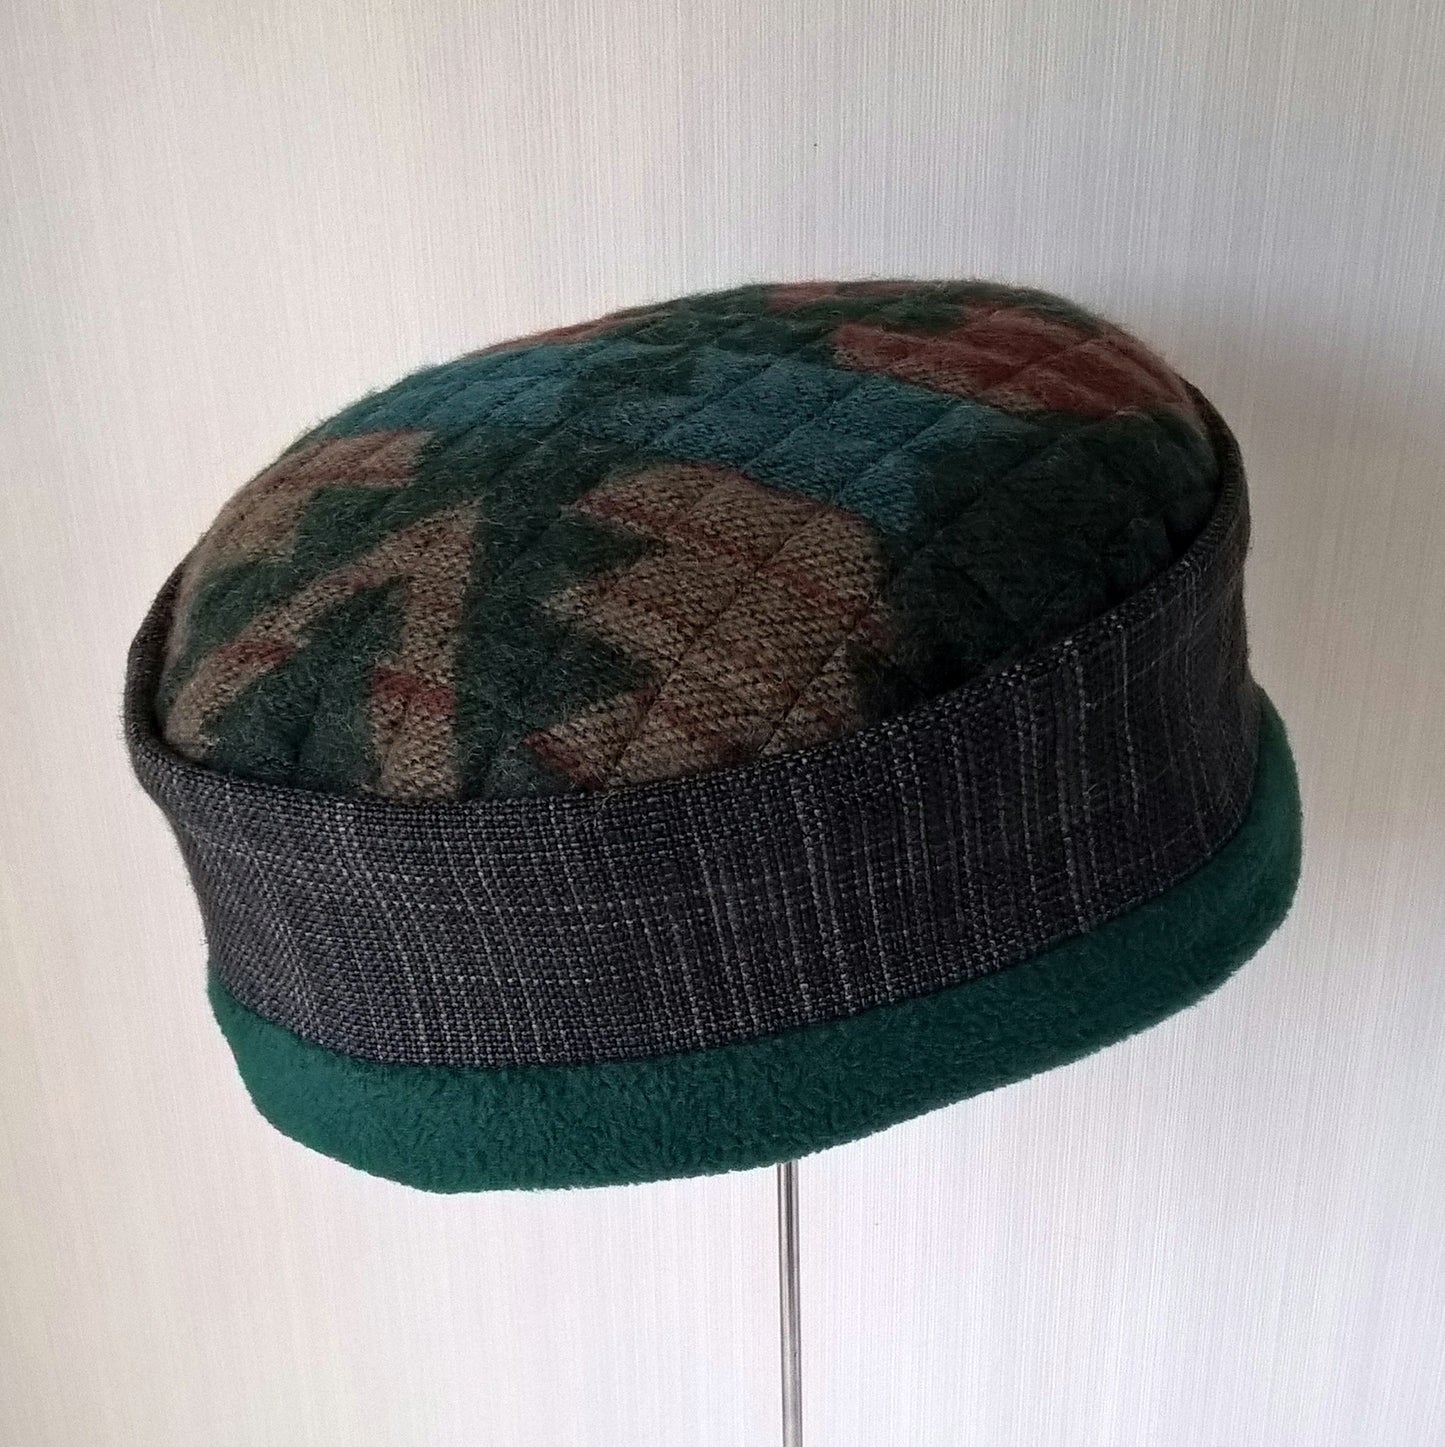 Forest green Aztec patterned winter hat with fleece lining